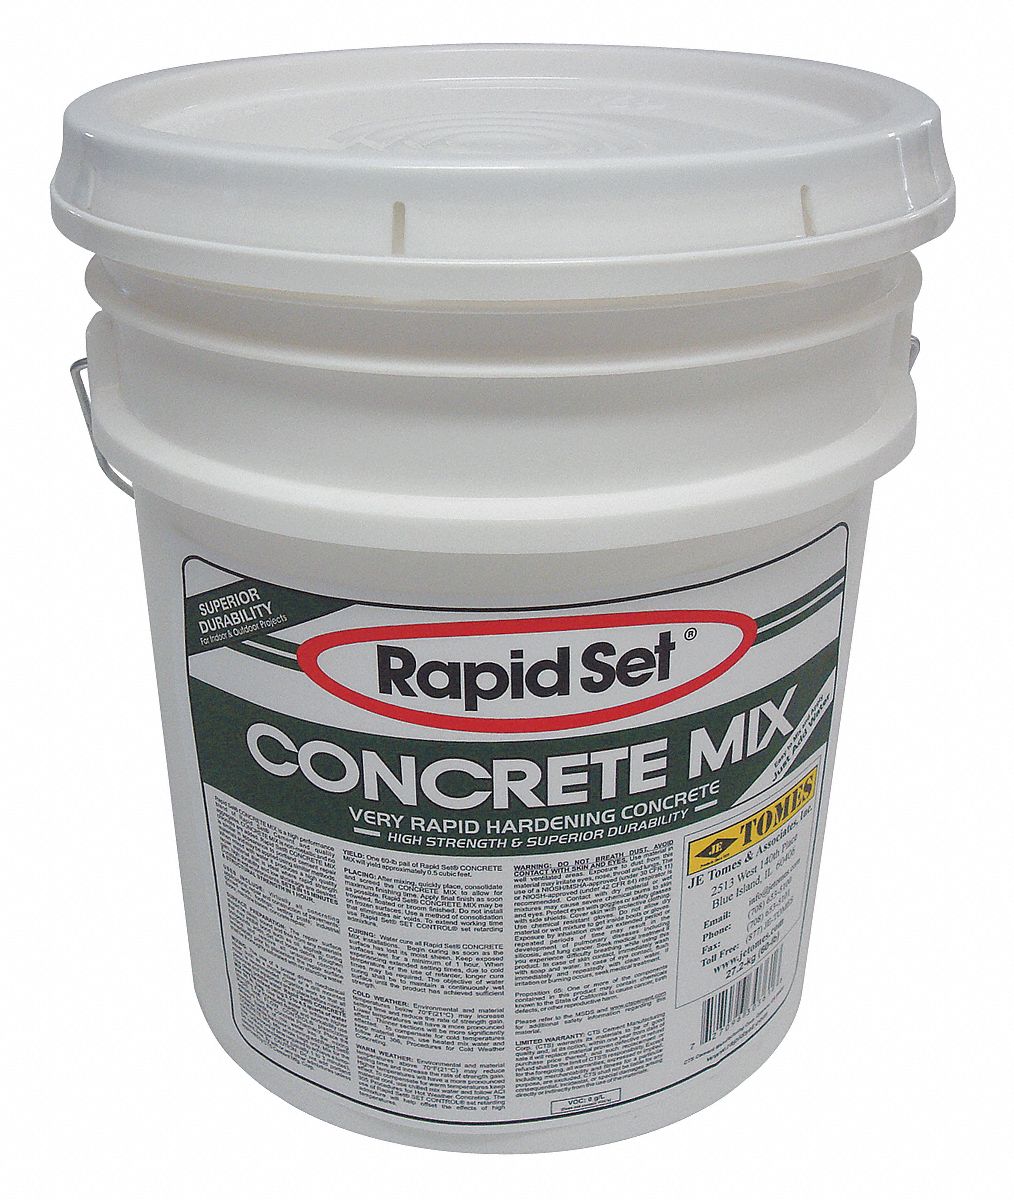 Concrete Mix: 60 lb, 15 min Starts to Harden, 1 hr Full Cure Time, 3 sq ft @ 2 in Coverage